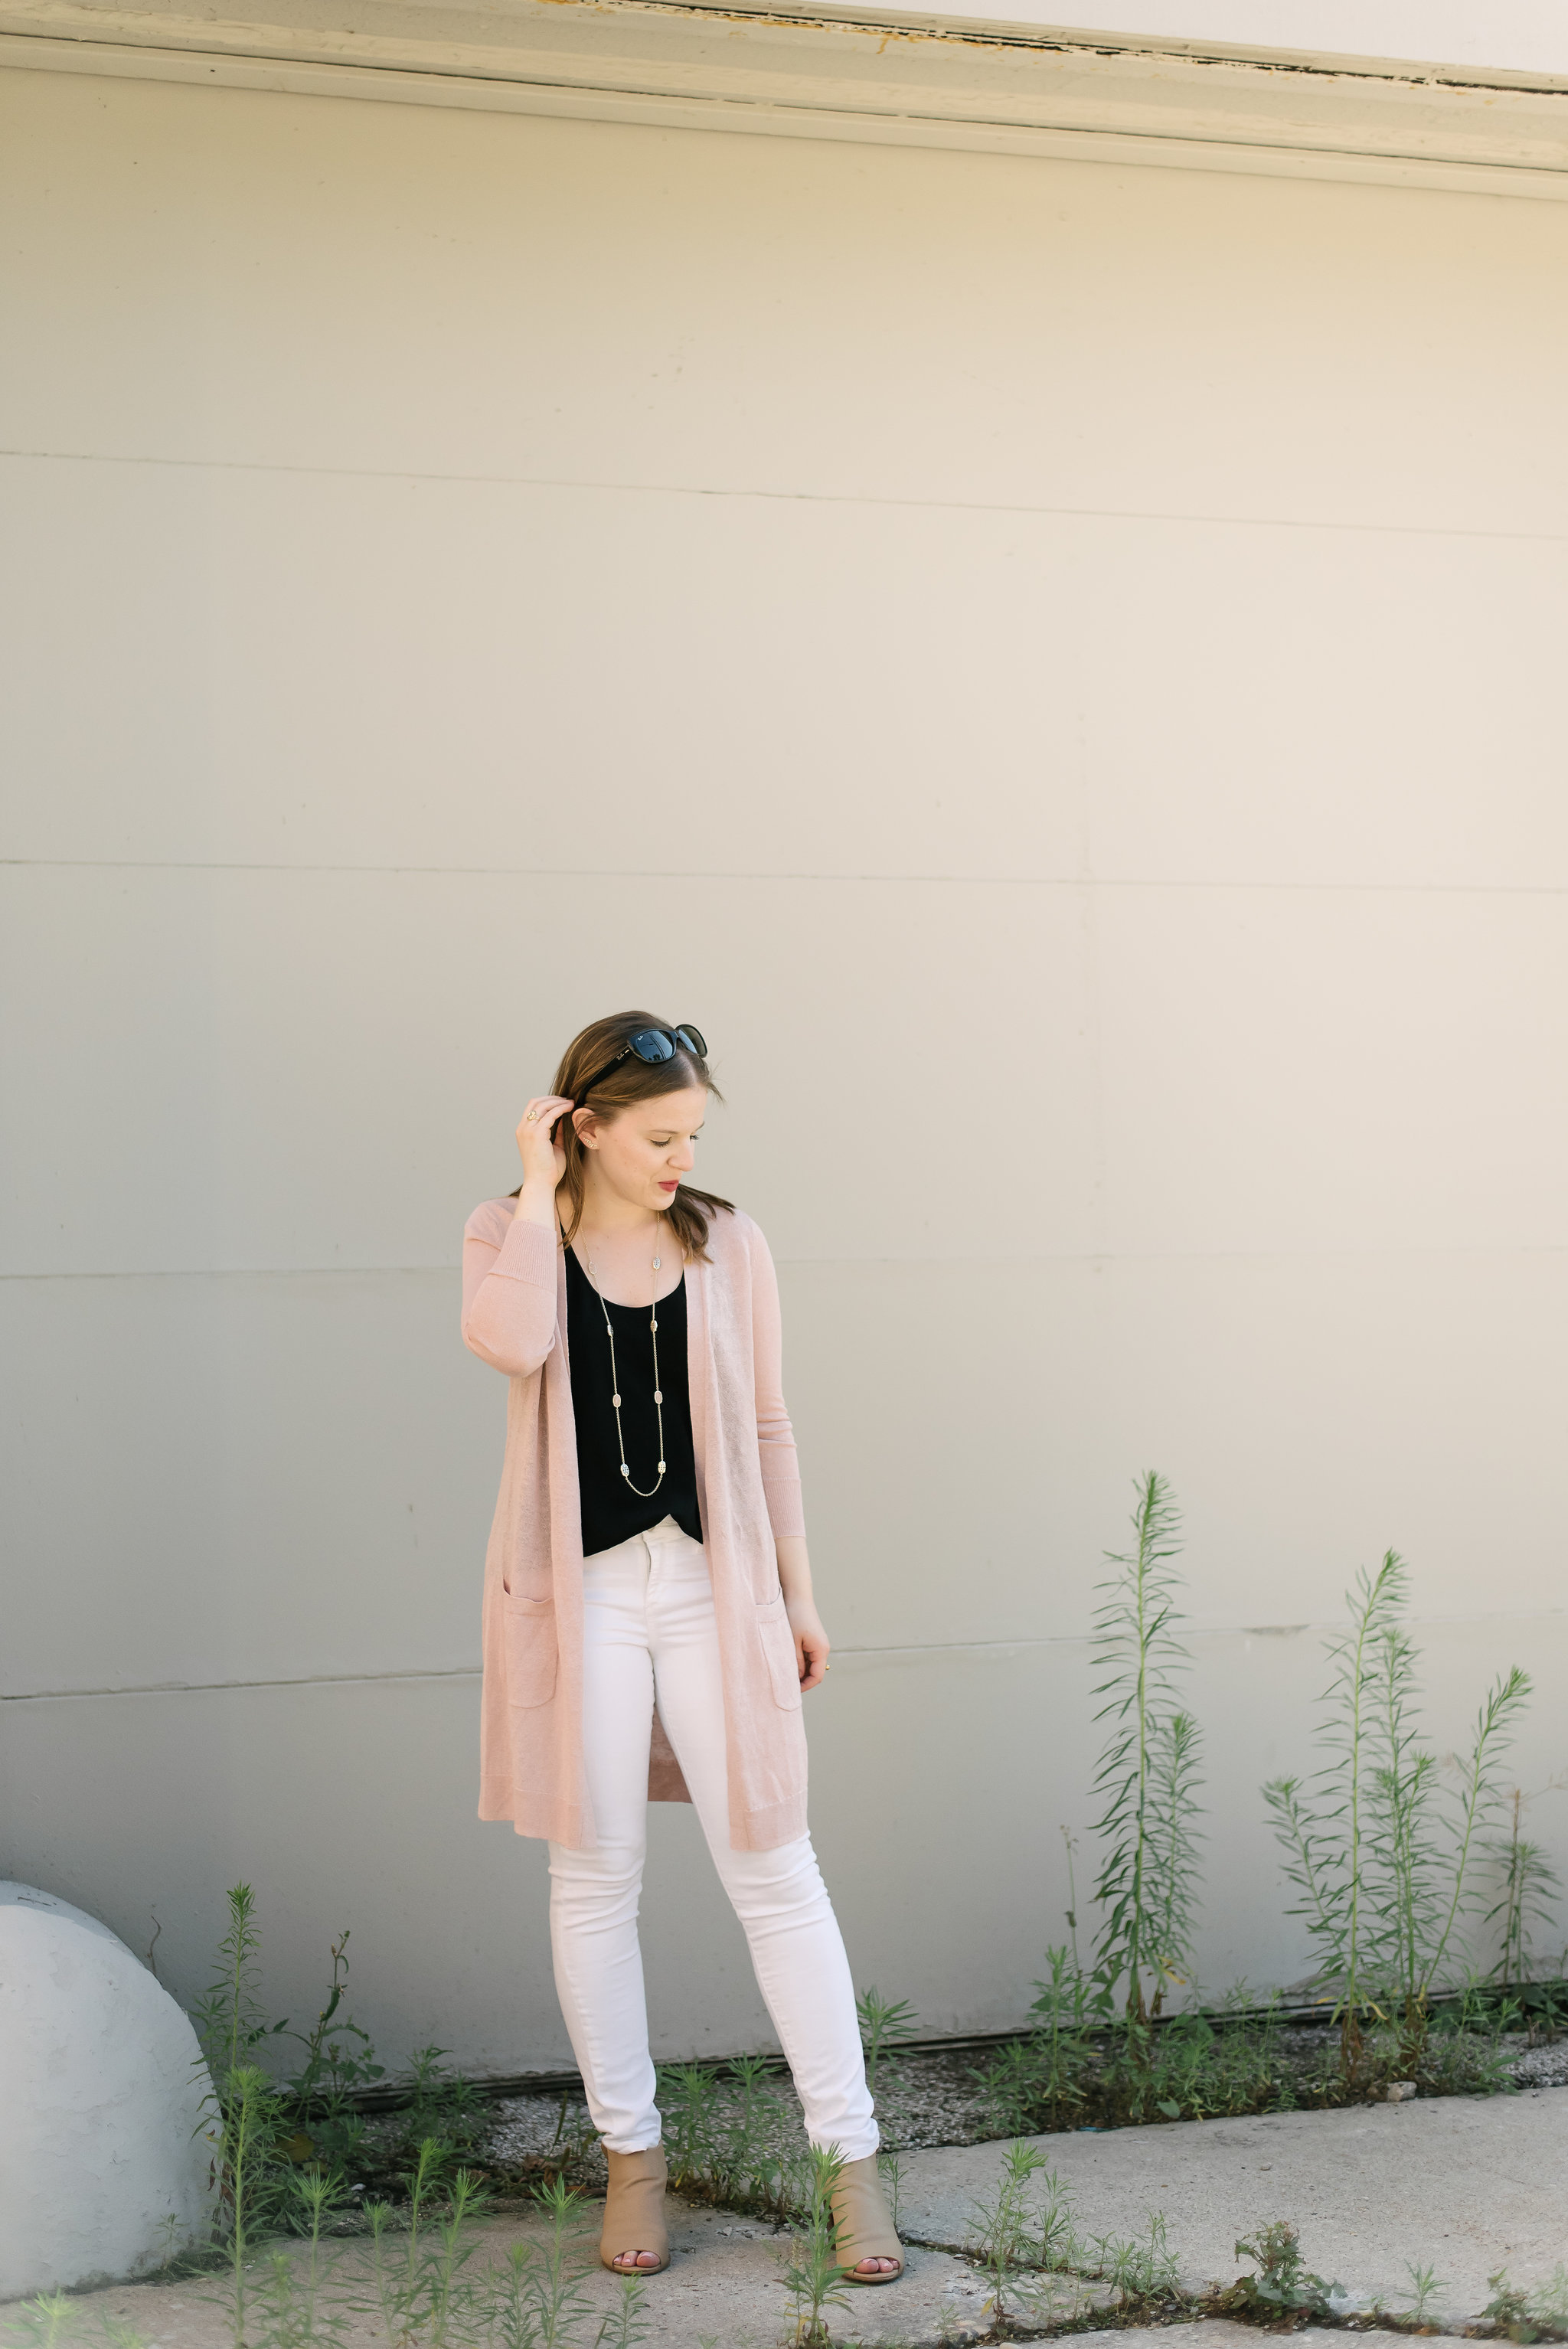 My Migraine Pain Relievers | Something Good, @Danaerinw , women's clothing, women's fashion, style, white denim, black tops, pink sweater, pink cardigan, spring outfit, ankle boots, peep toe booties